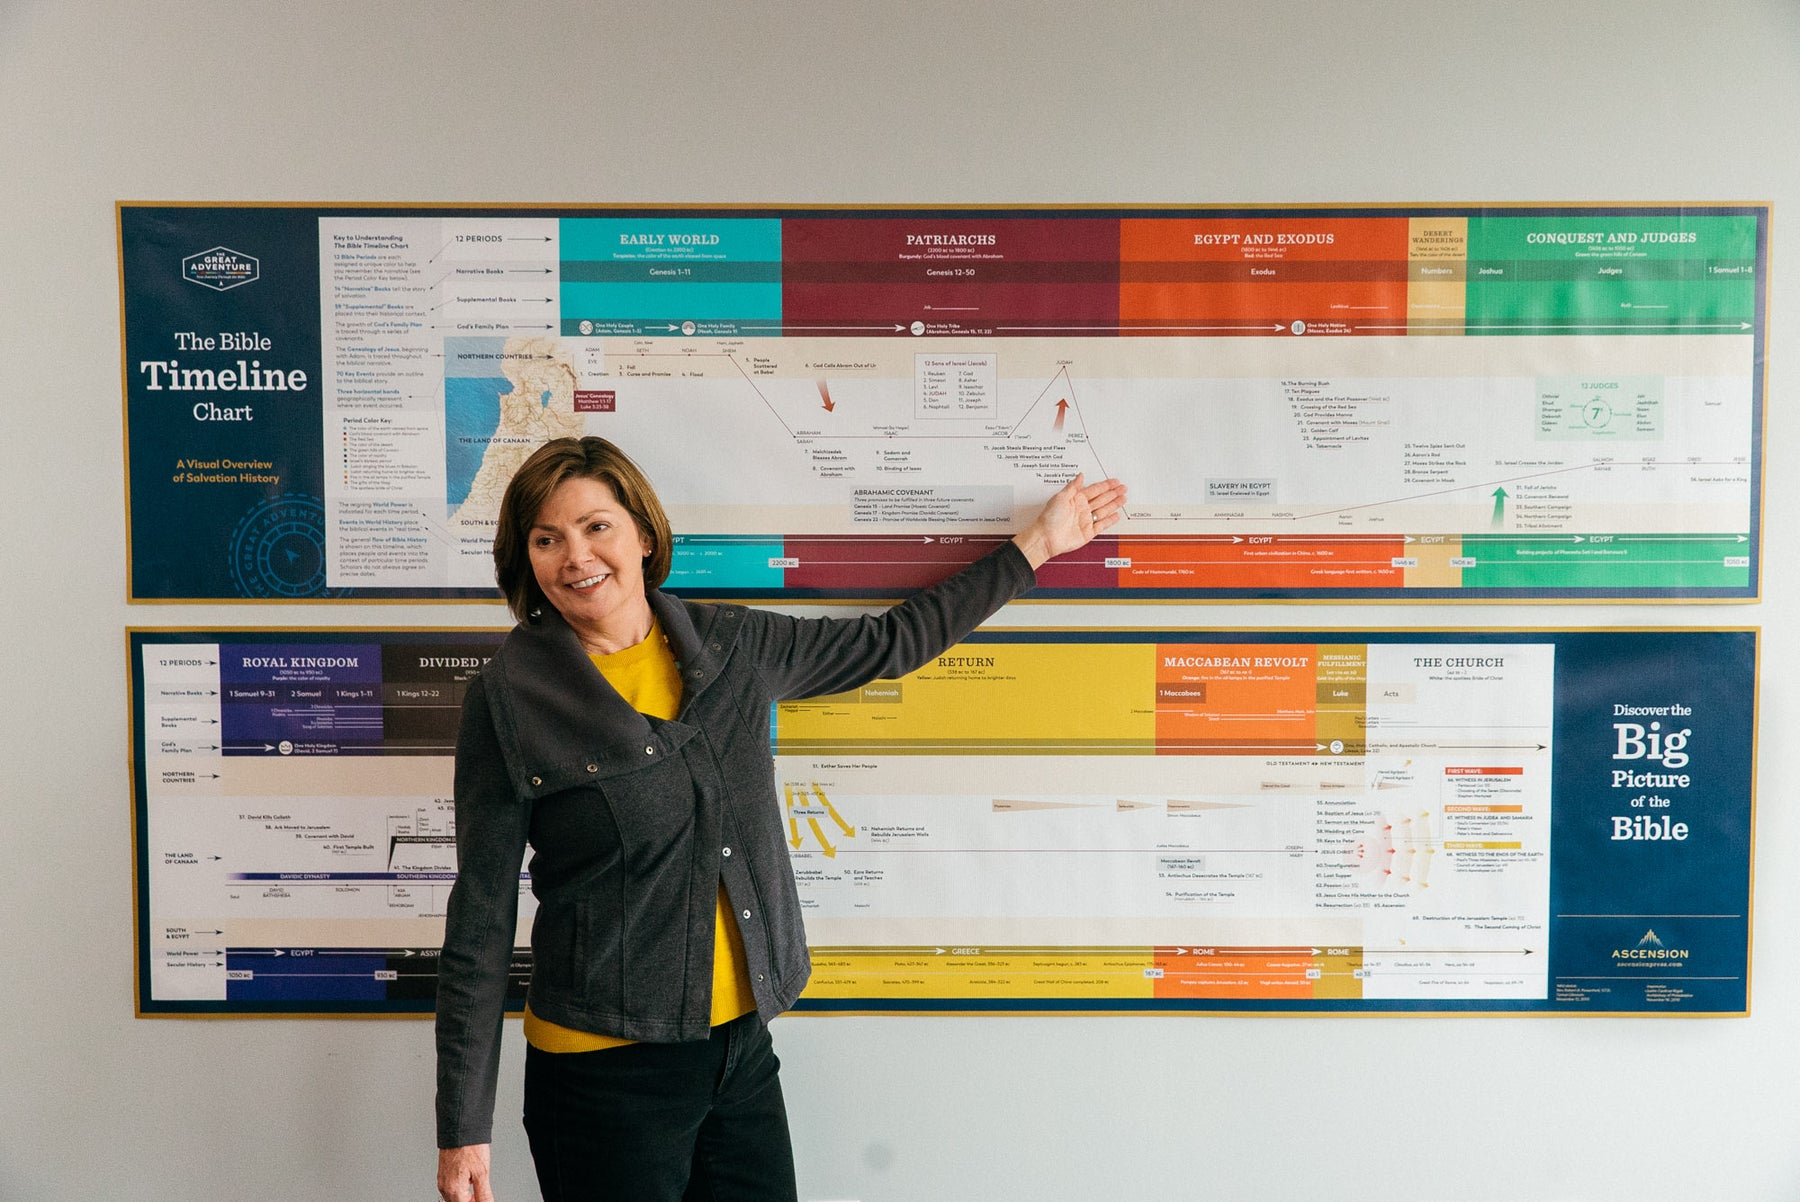 Woman with short hair in grey jacket and yellow shirt gesturing to the top part of The Great Adventure Bible Timeline Wall Chart.